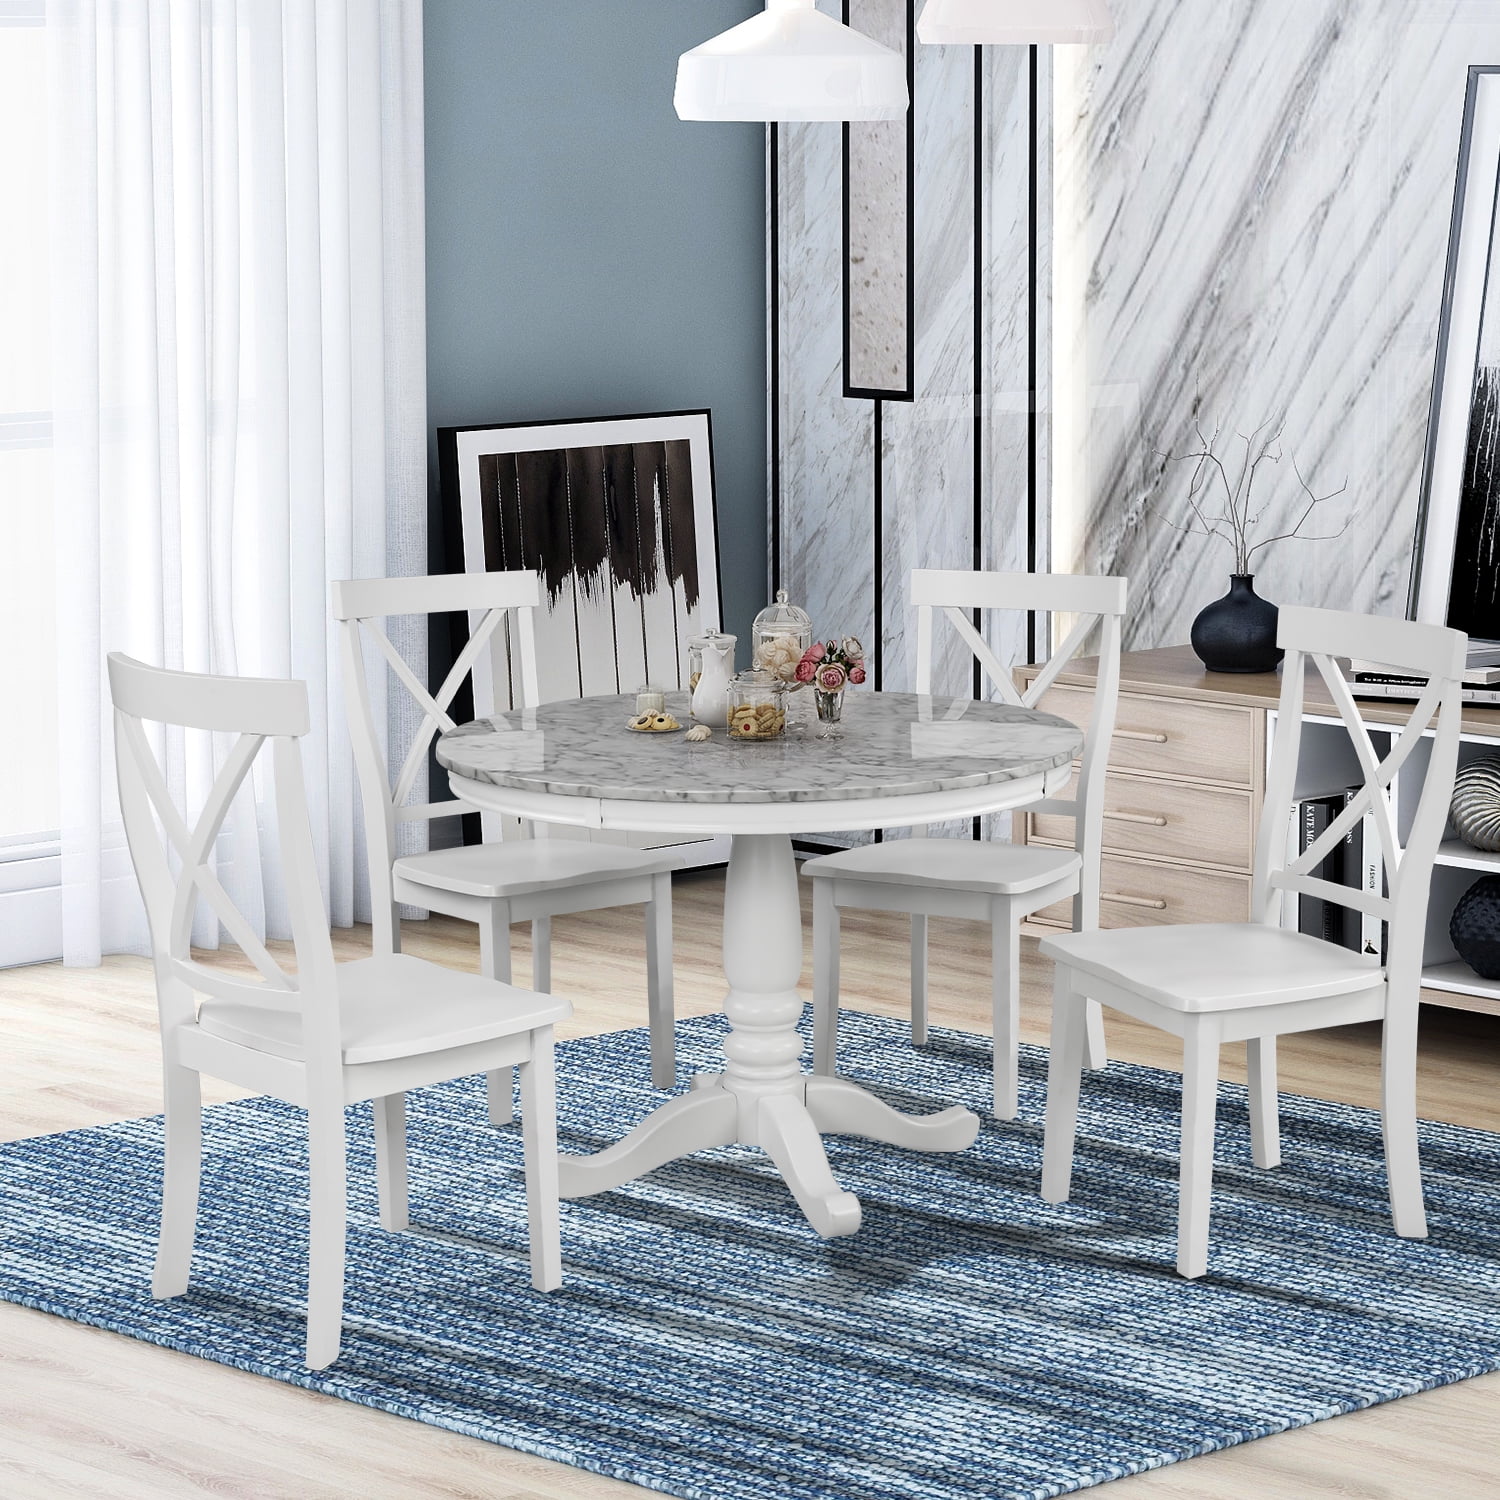 Dining Table Chairs Set For 4, White Kitchen Table Round Modern Design